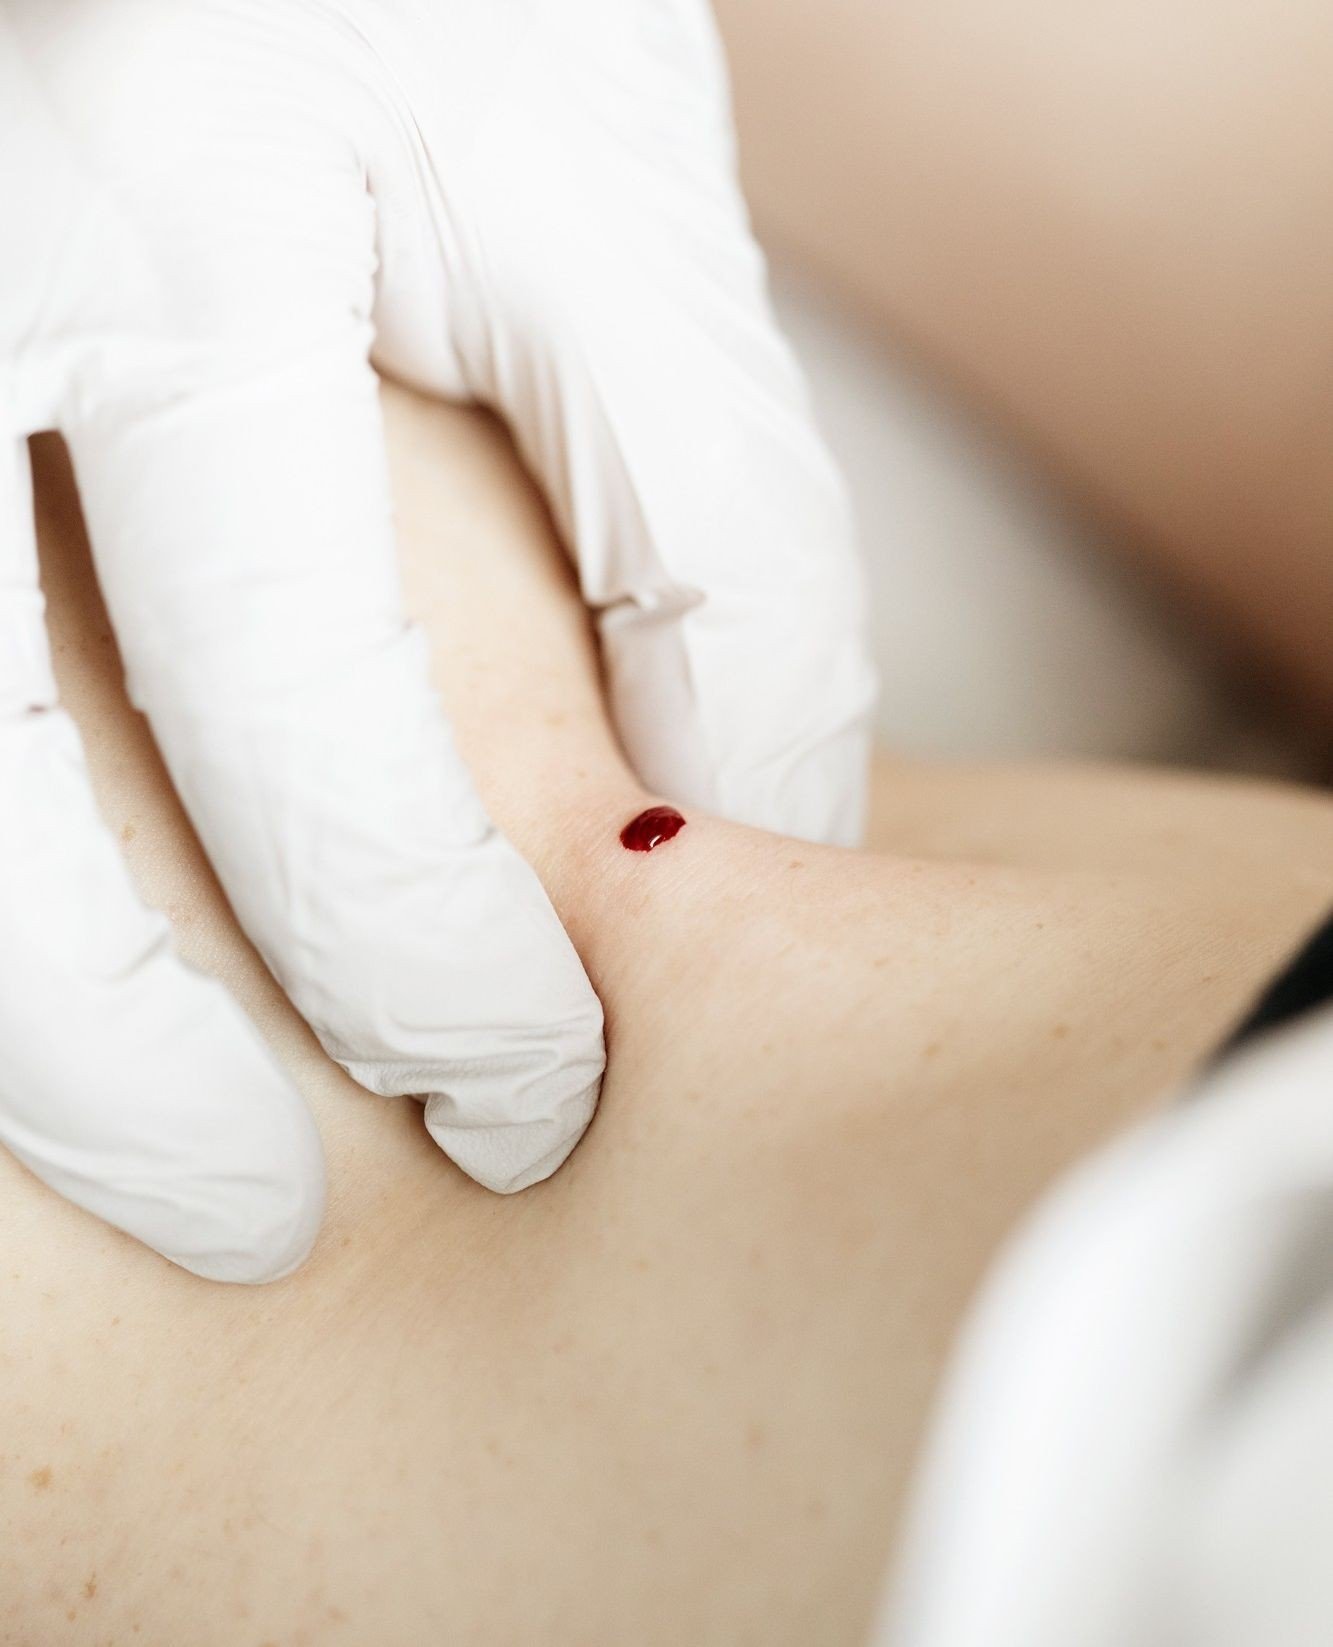 🩸 Why we bleed people on purpose🩸 ⁠
⁠
As Chinese medical practitioners, we offer a range of treatments like acupuncture, cupping, moxa, and gua sha. But have you heard about micro-letting? This lesser-known technique involves pricking the skin with